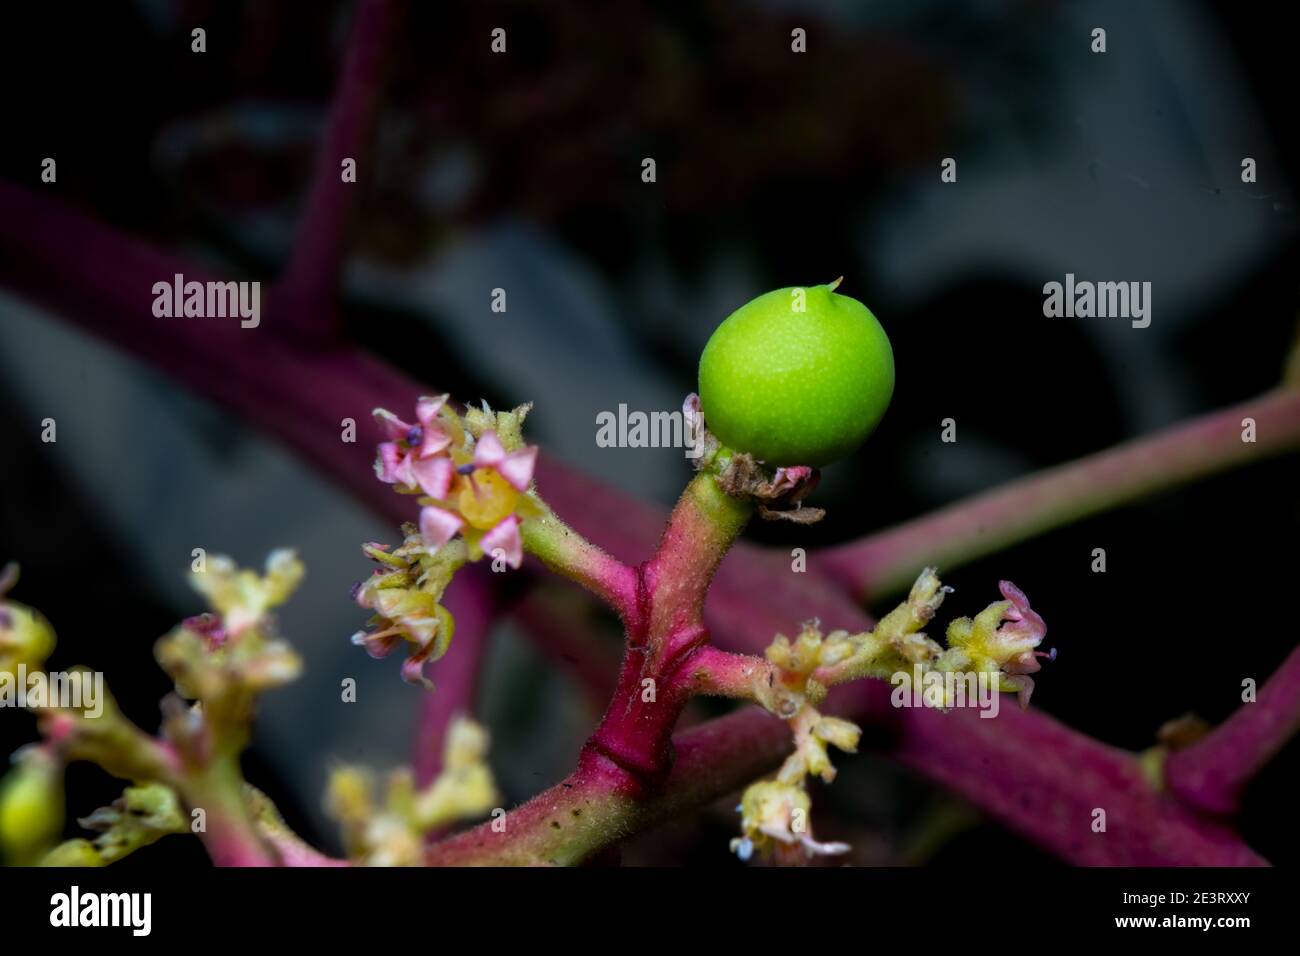 close up of the baby mango known as mangifera indica with flowers. Stock Photo